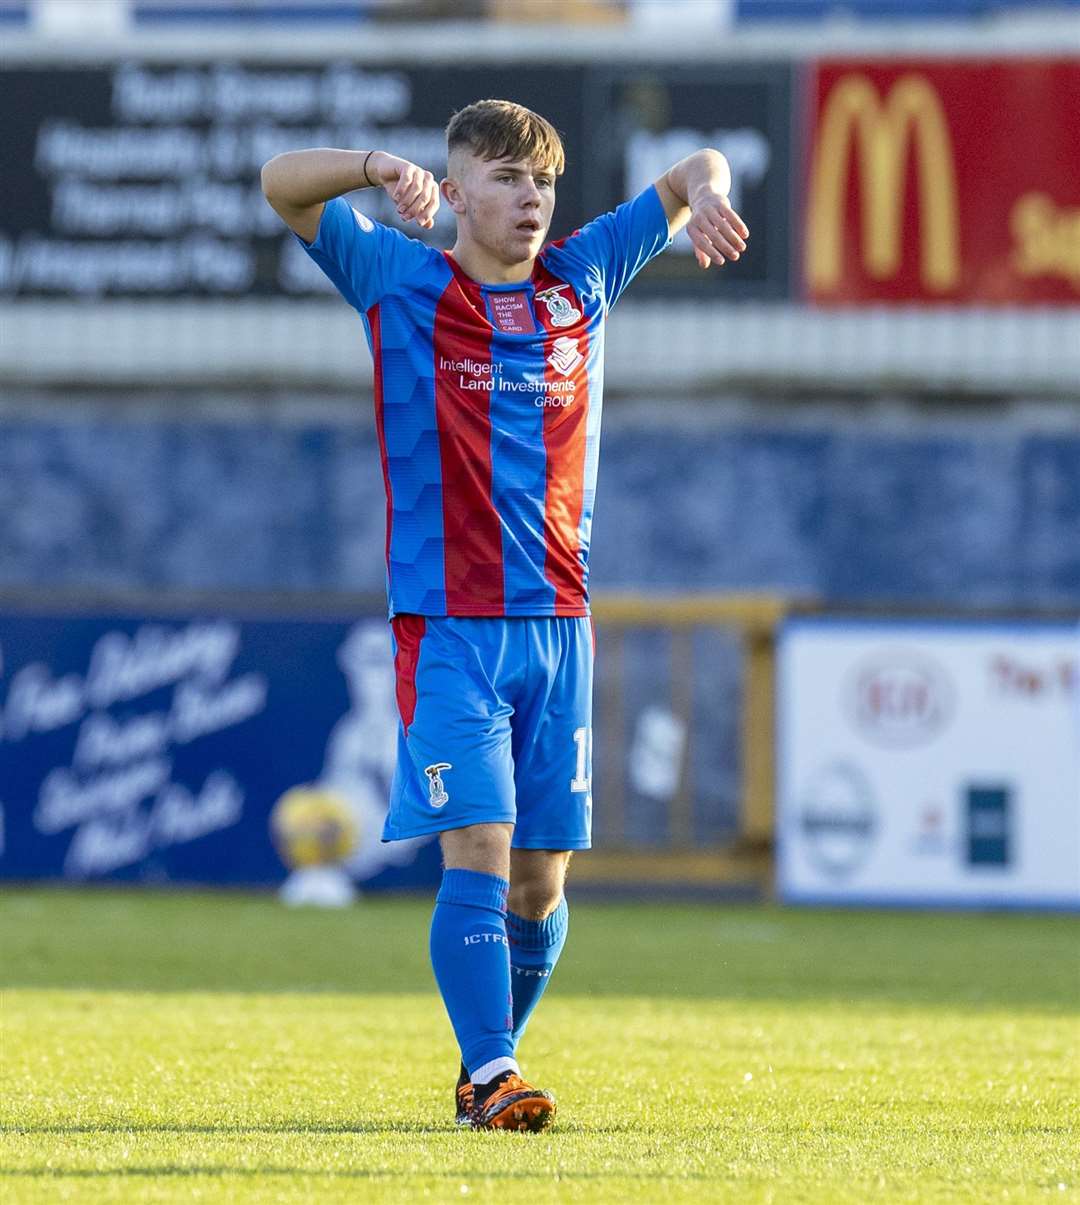 Picture - Ken Macpherson, Inverness. Inverness CT(1) v Ayr United(1). 24.10.19. 18-year-old Rangers loanee Kai Kennedy made his debut in the 2nd half.